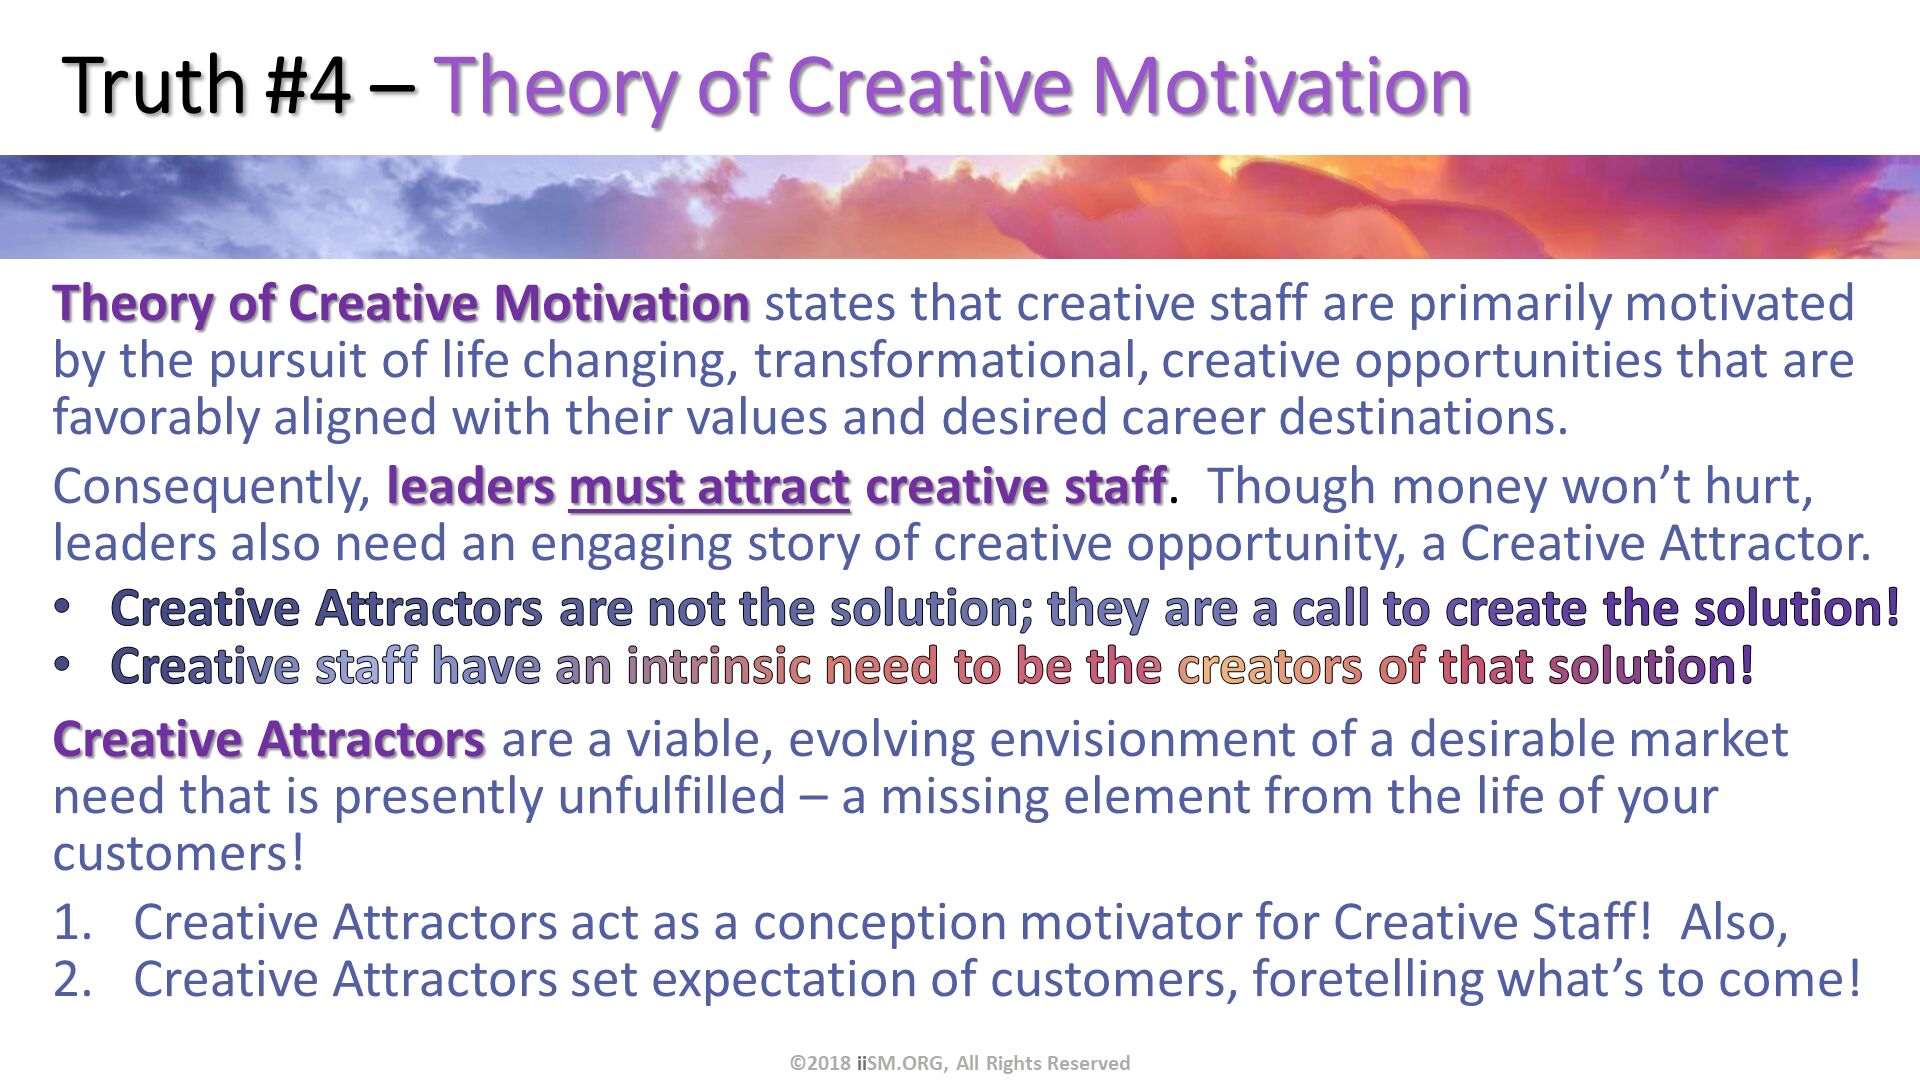 Truth #4 – Theory of Creative Motivation. Theory of Creative Motivation states that creative staff are primarily motivated by the pursuit of life changing, transformational, creative opportunities that are favorably aligned with their values and desired career destinations.
Consequently, leaders must attract creative staff.  Though money won’t hurt, leaders also need an engaging story of creative opportunity, a Creative Attractor.
Creative Attractors are not the solution; they are a call to create the solution!
Creative staff have an intrinsic need to be the creators of that solution!
Creative Attractors are a viable, evolving envisionment of a desirable market need that is presently unfulfilled – a missing element from the life of your customers!
Creative Attractors act as a conception motivator for Creative Staff!  Also,
Creative Attractors set expectation of customers, foretelling what’s to come!
. ©2018 iiSM.ORG, All Rights Reserved. 